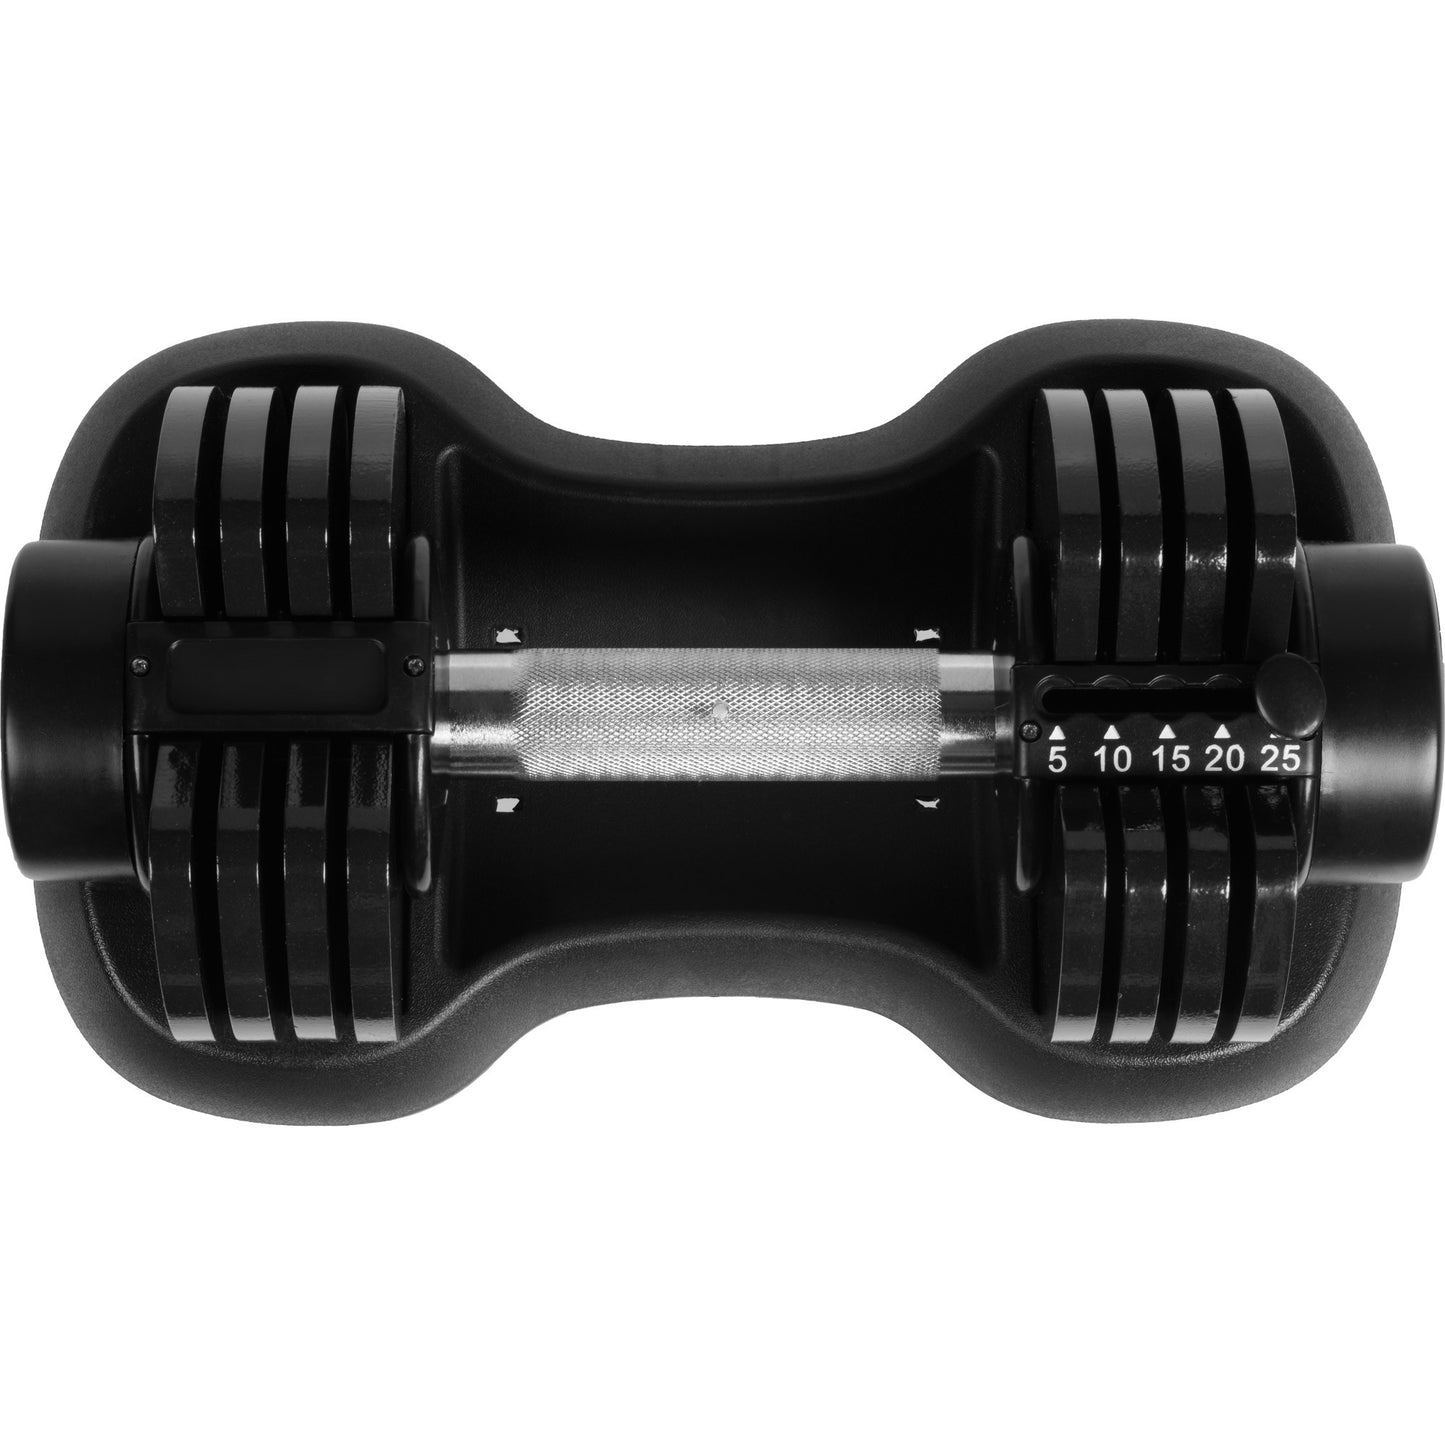 1PC Adjustable Dumbbell 25 lbs with Fast Automatic Adjustable and Weight Plate for Body Workout Home Gym, black RT